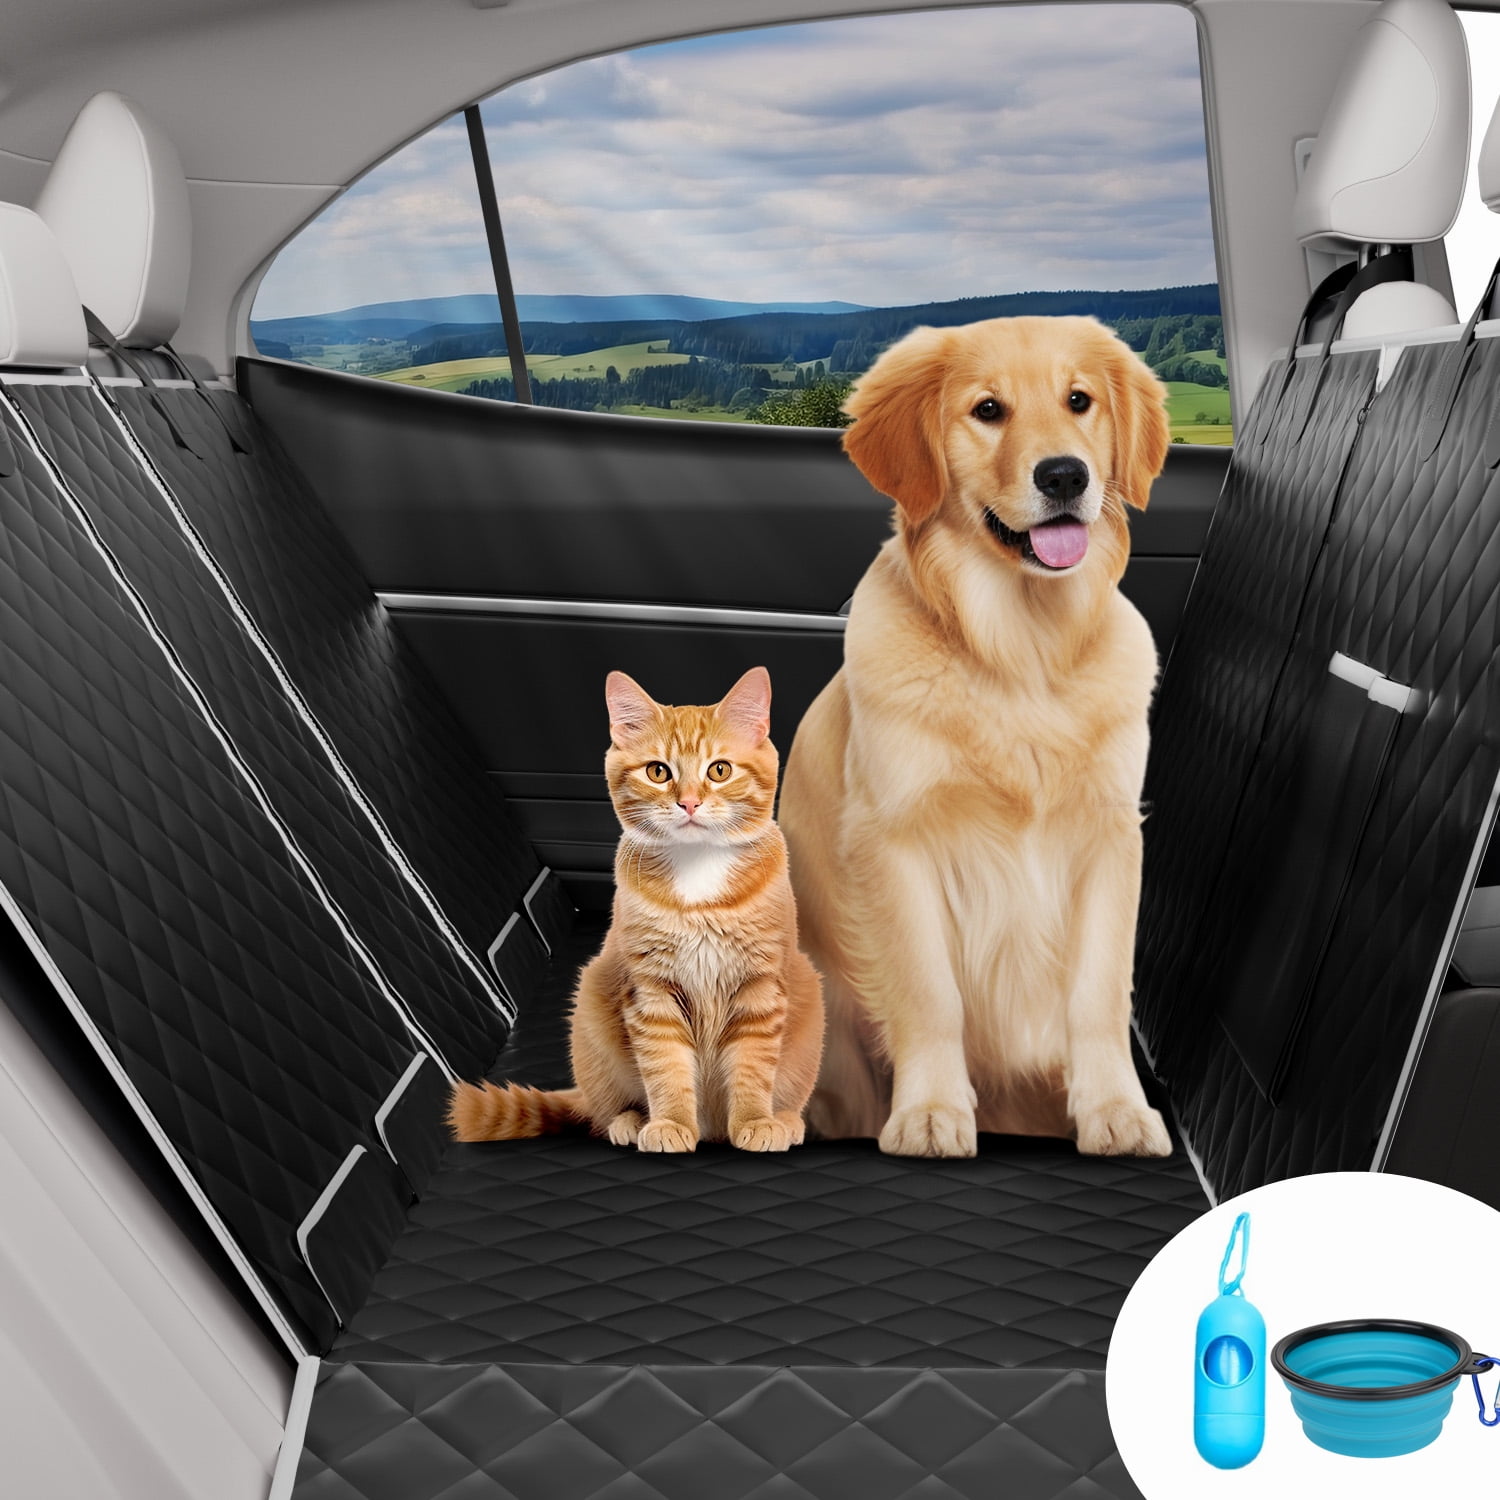 Active Pets Premium Dog Car Seat Cover for Trucks, Sedans & SUVs -  Waterproof Backseat Protection for Dog Travel - Puppy Essentials